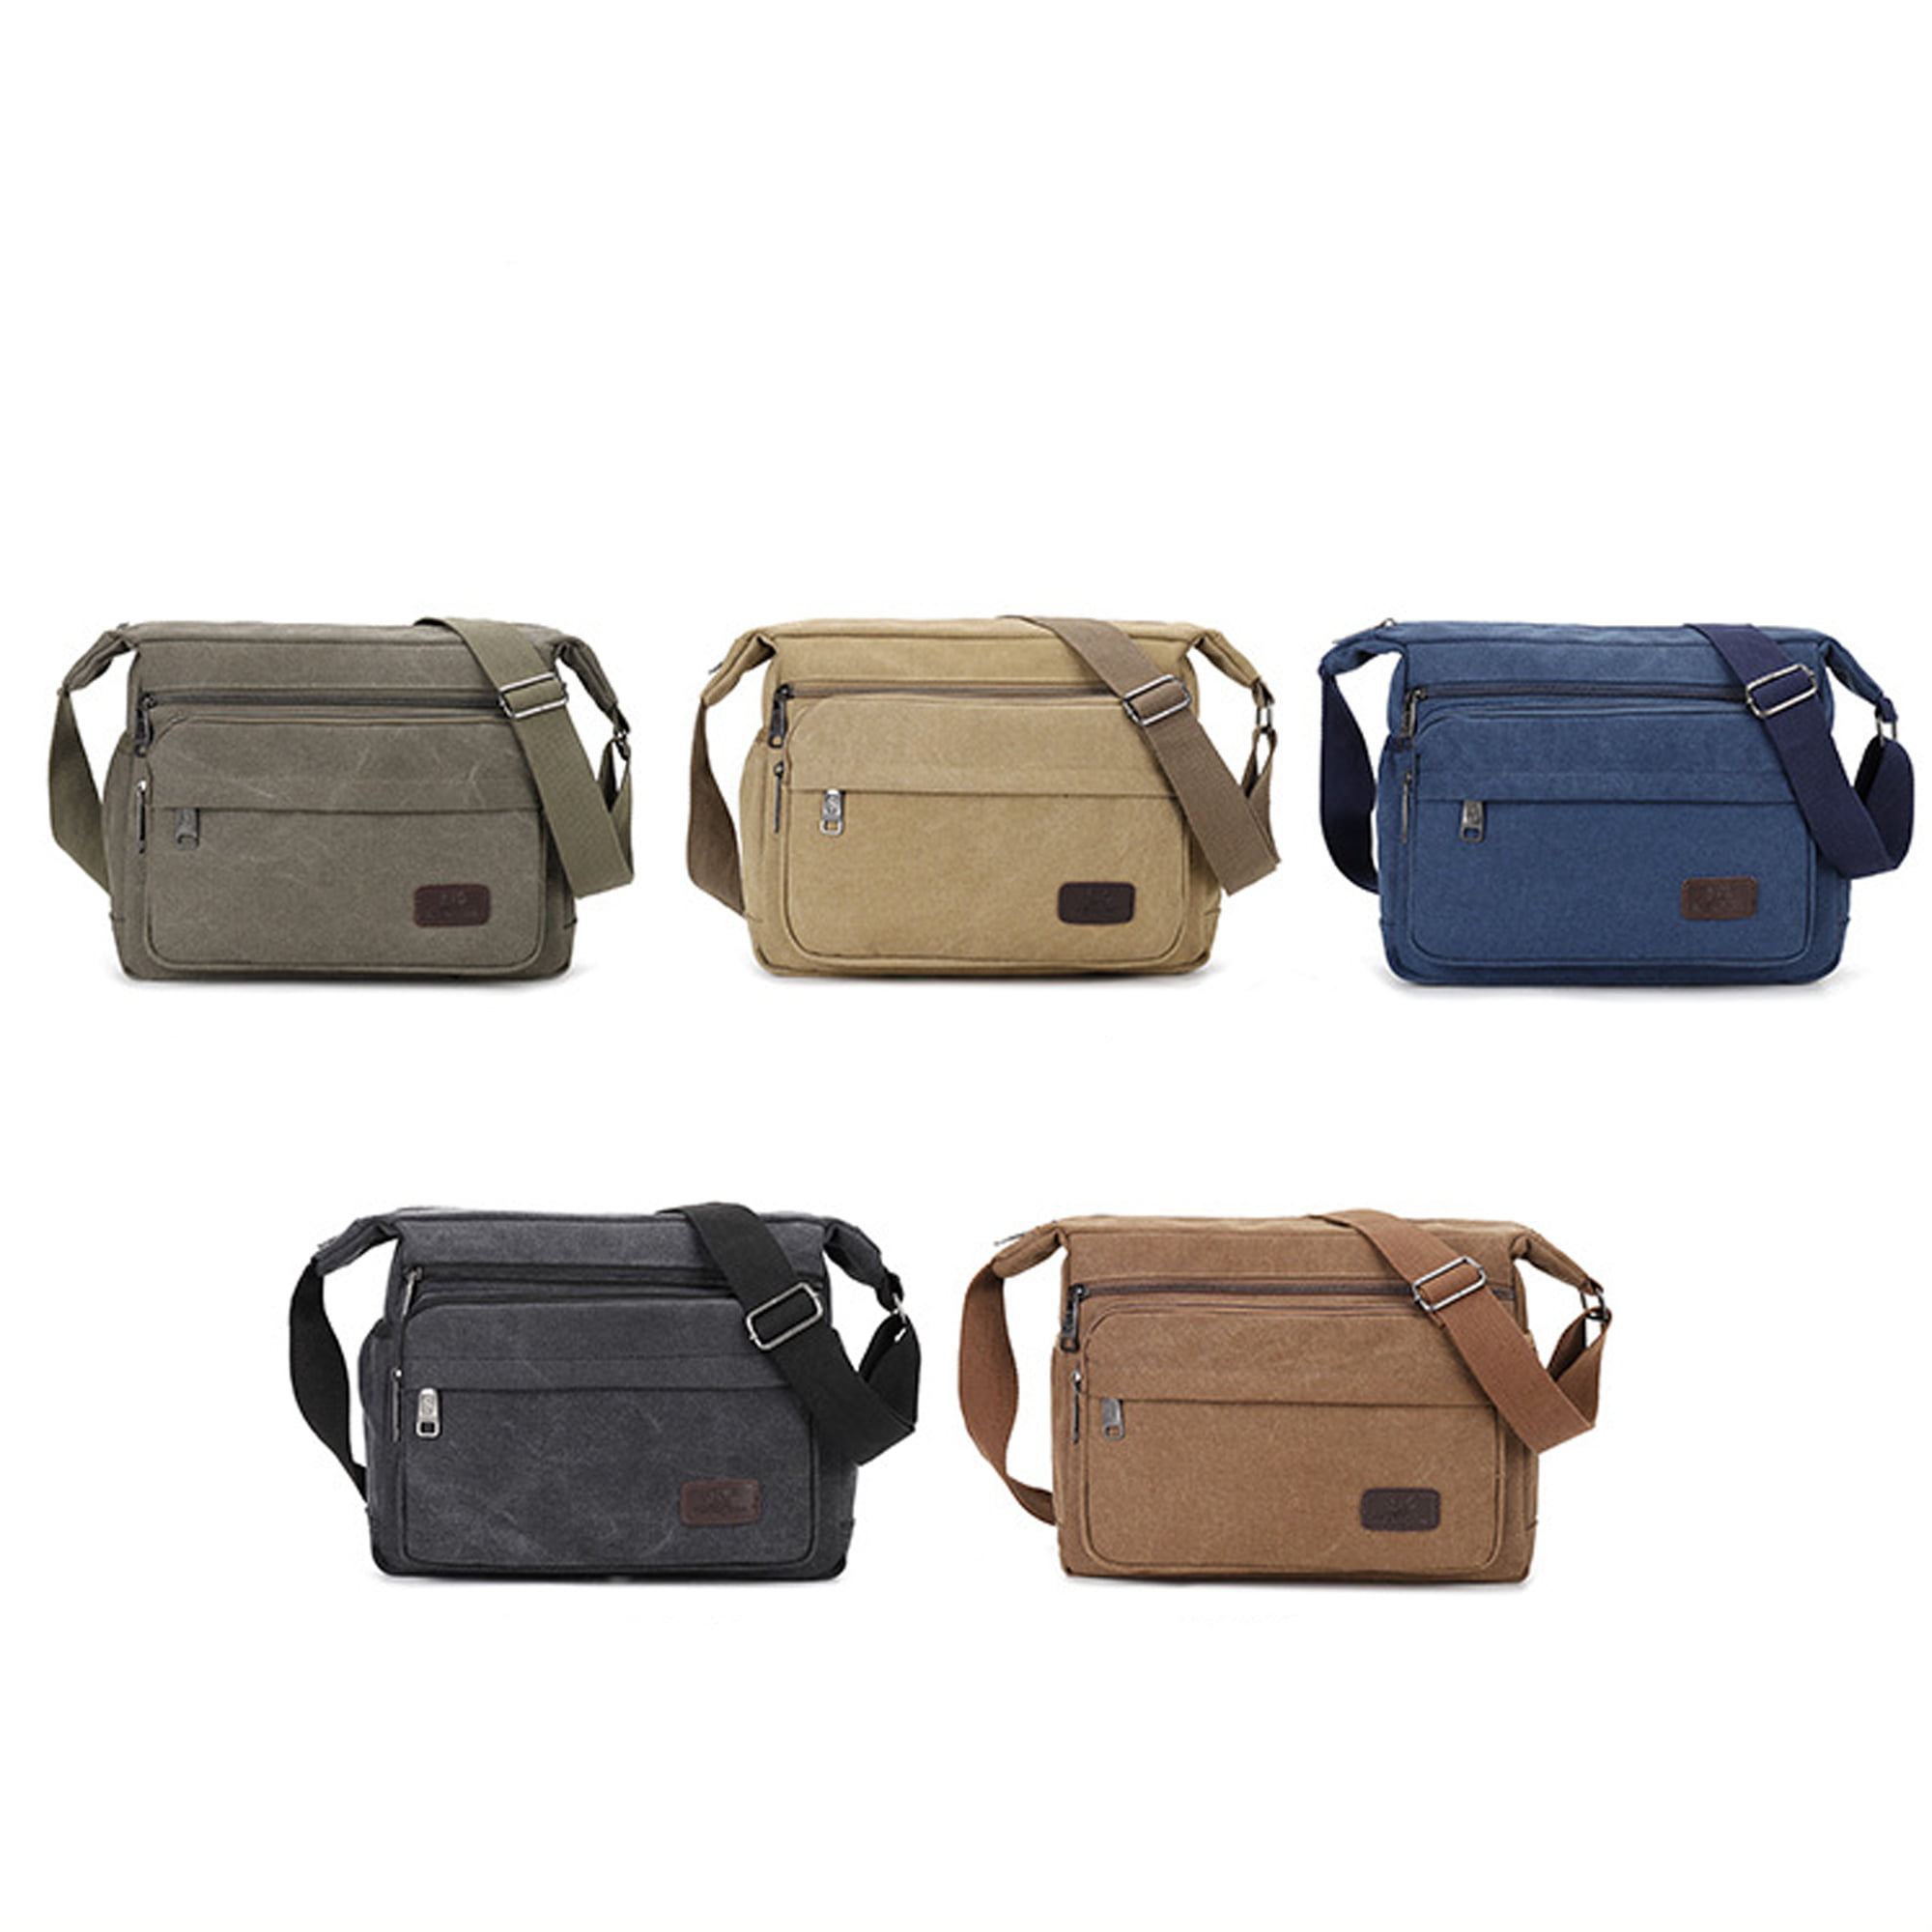 Men's Canvas Messenger Bag With Multiple Pockets, Large Capacity Portable  Tool Kit，Men's Casual Travel Hiking Crossbody Bag, Outdoor Shoulder Bags